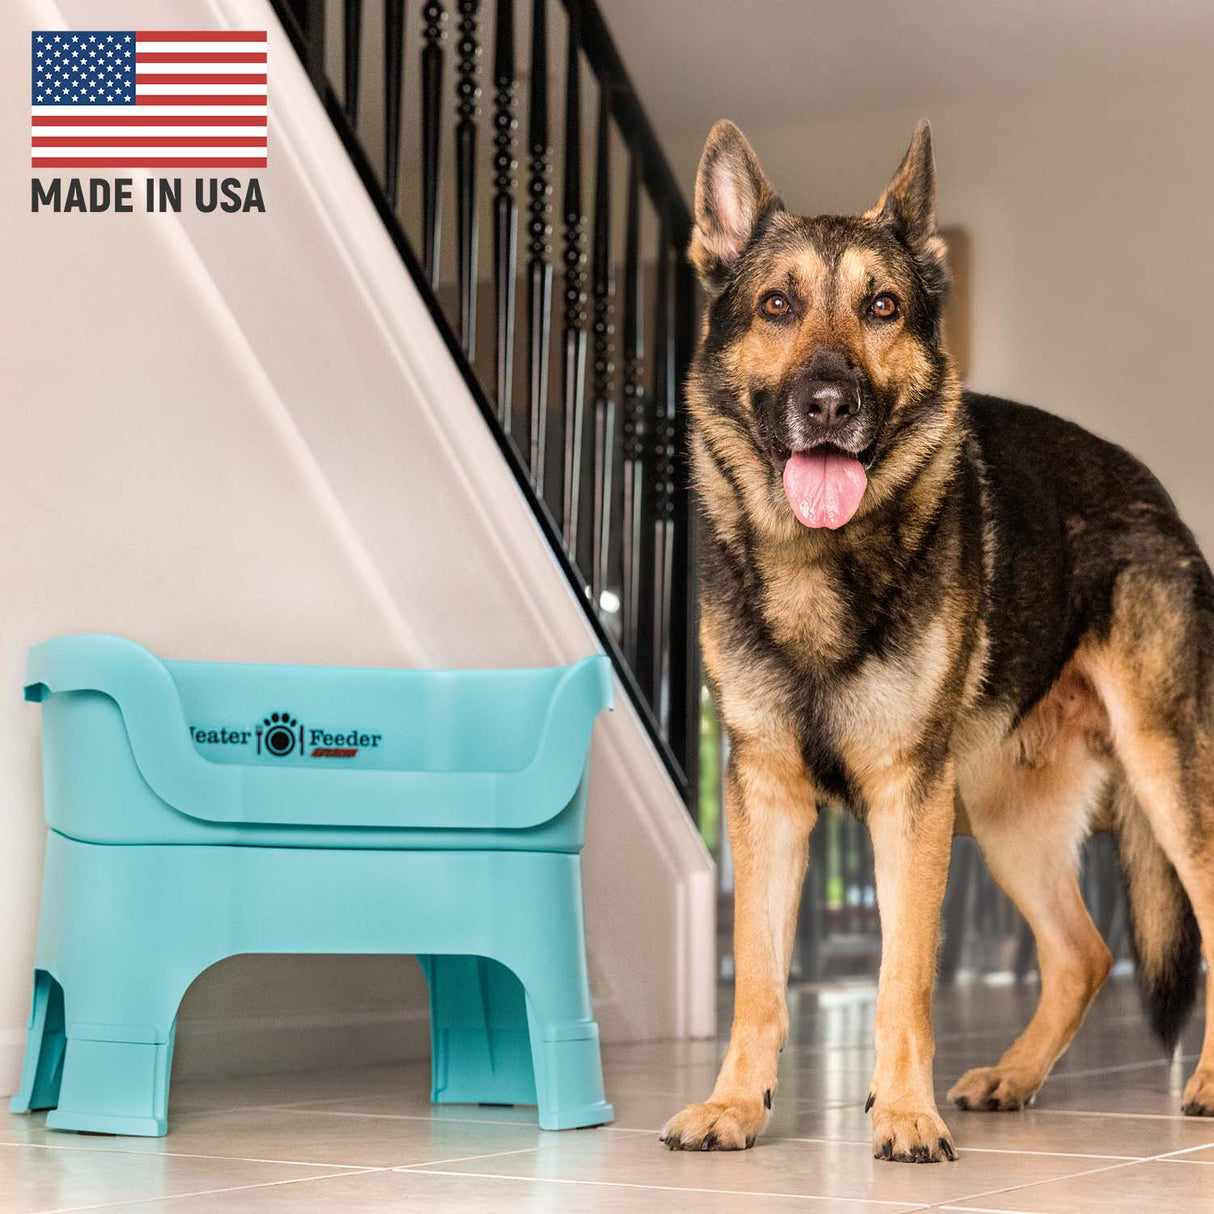 German Shepherd next to Aquamarine Neater Feeder Deluxe - Made in the USA